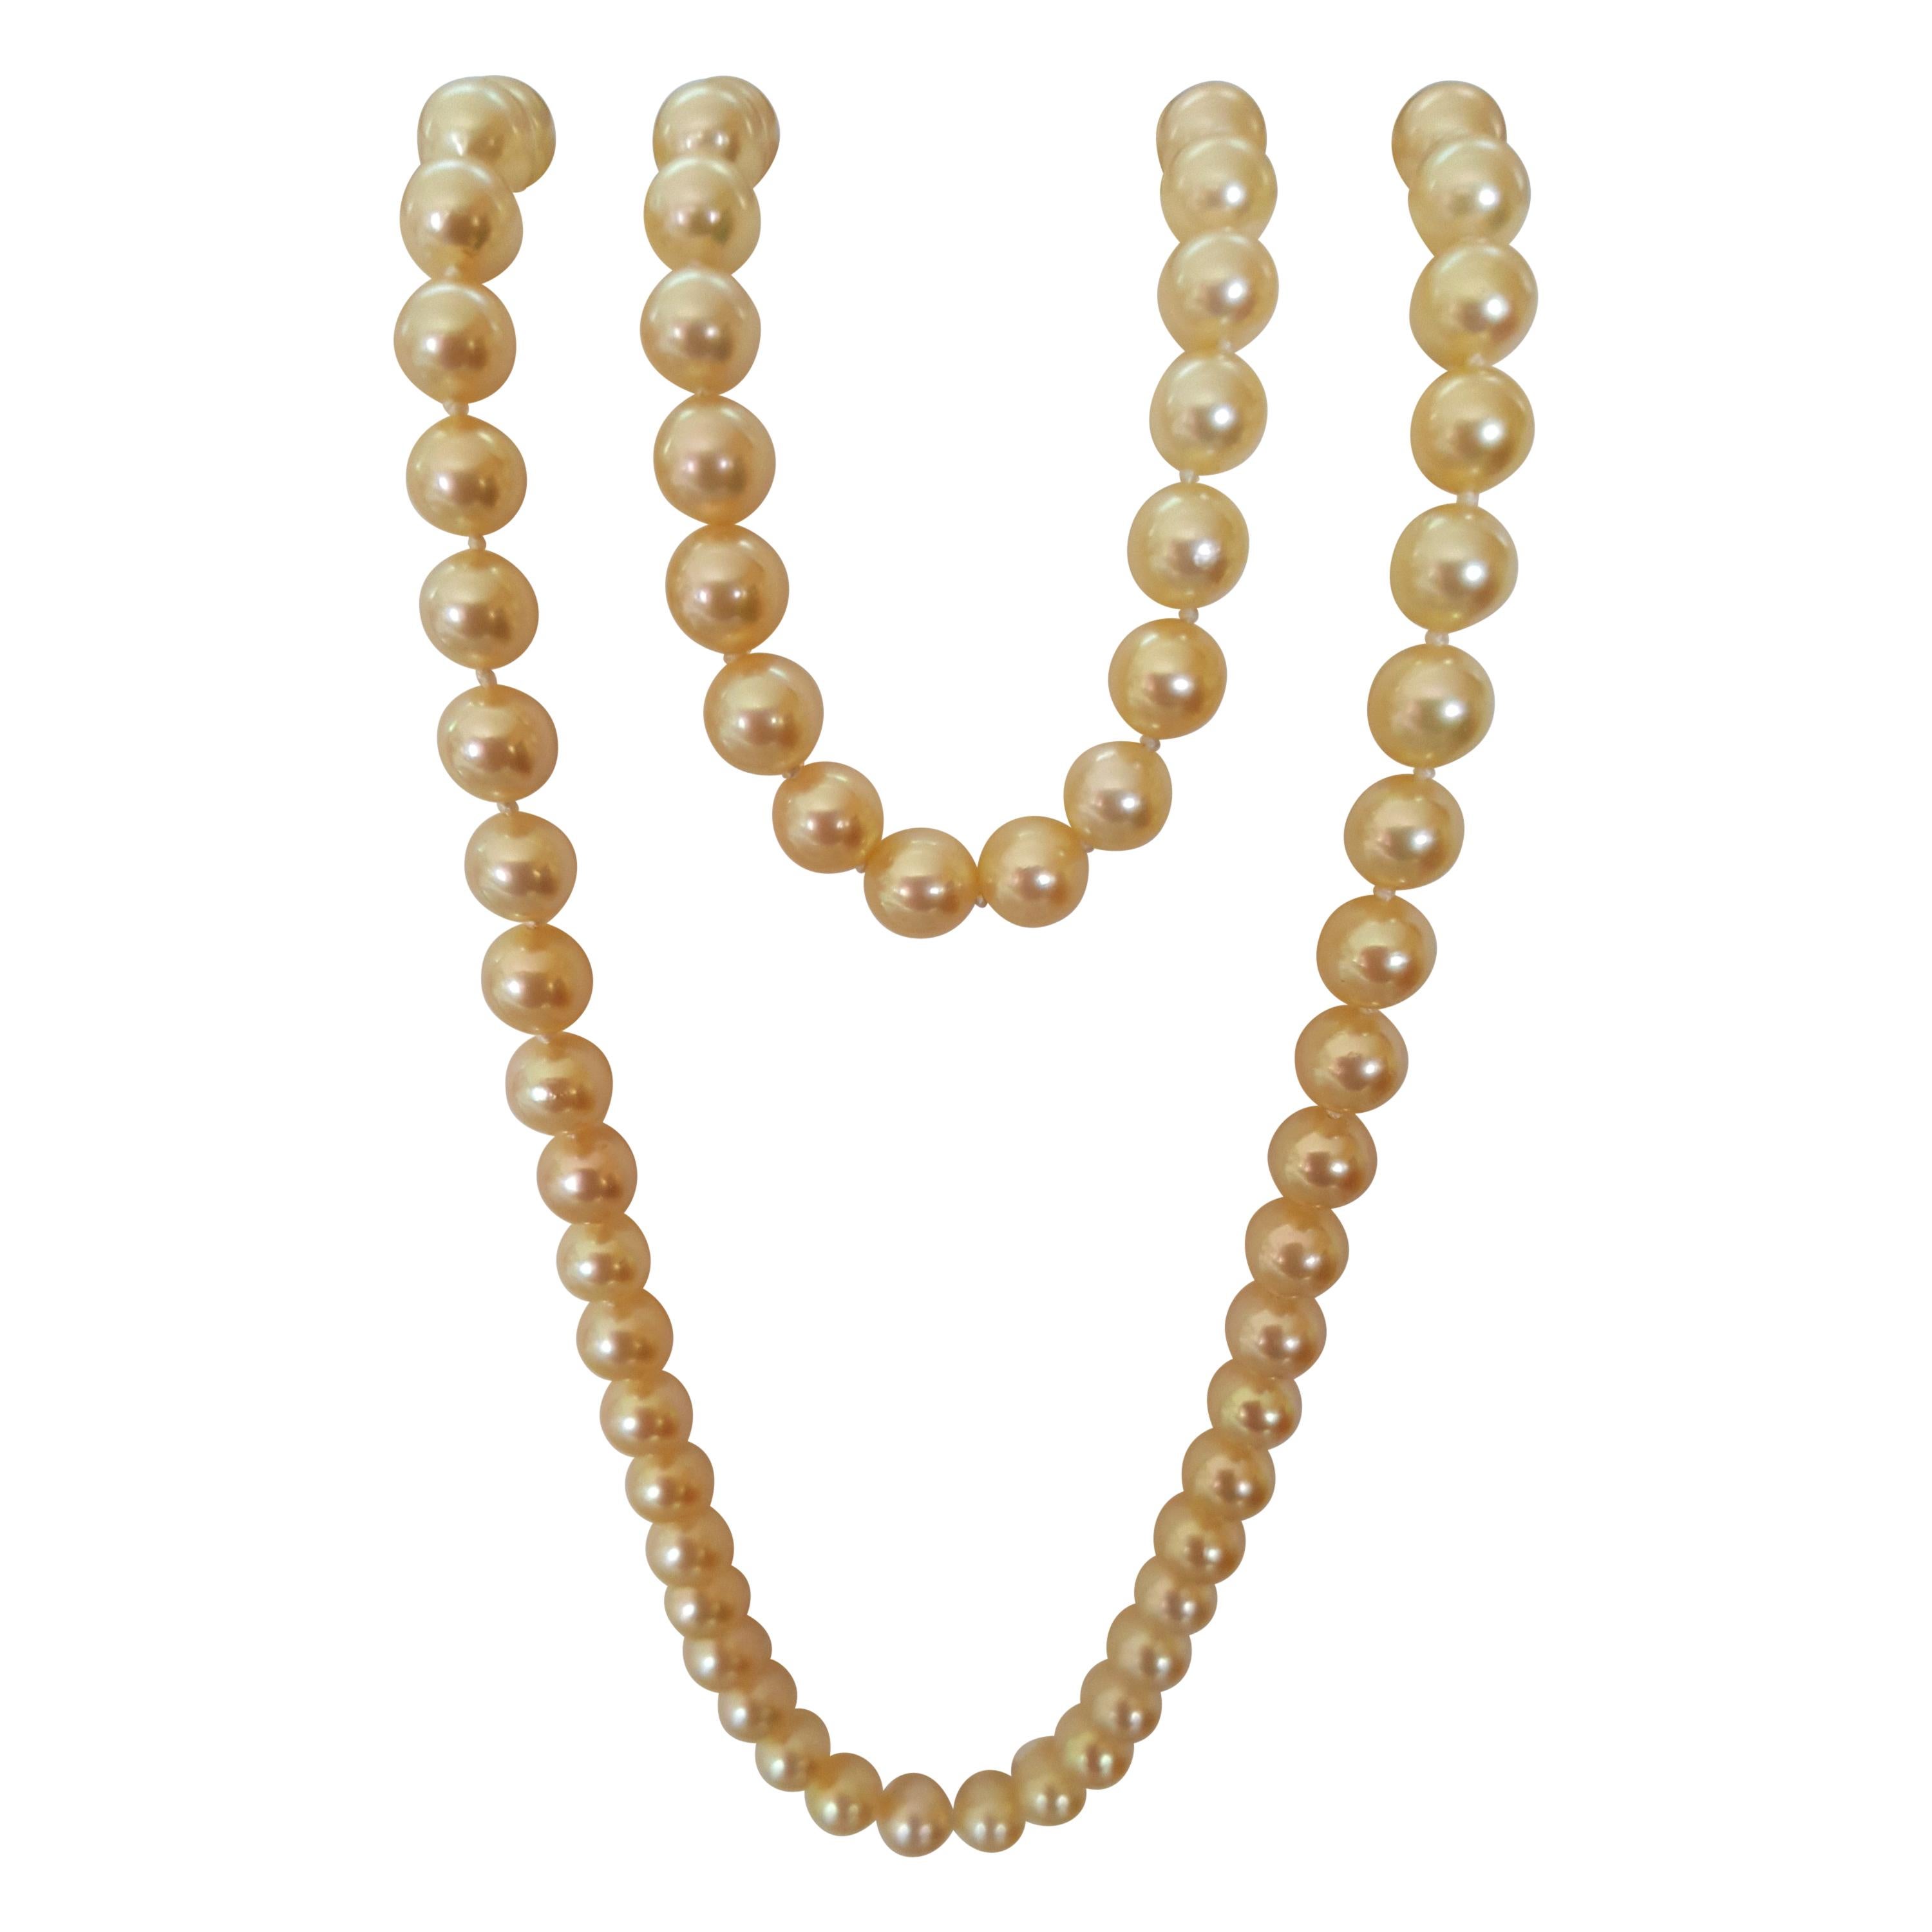 Cream Gold AAA Grade Cultured Pearl Set Necklace Bracelet 14kt, 7+mm, 27 Inches